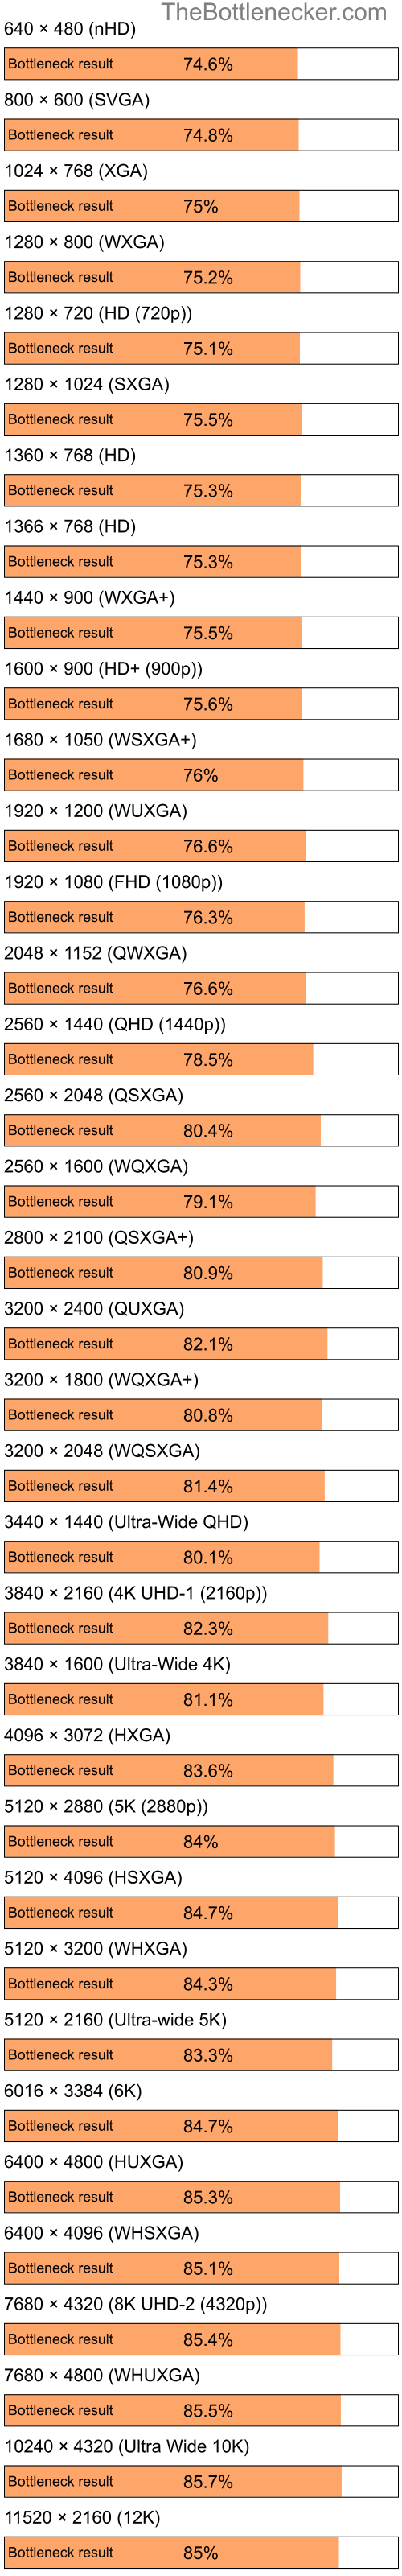 Bottleneck results by resolution for Intel Pentium 4 and AMD Radeon 9550 in General Tasks